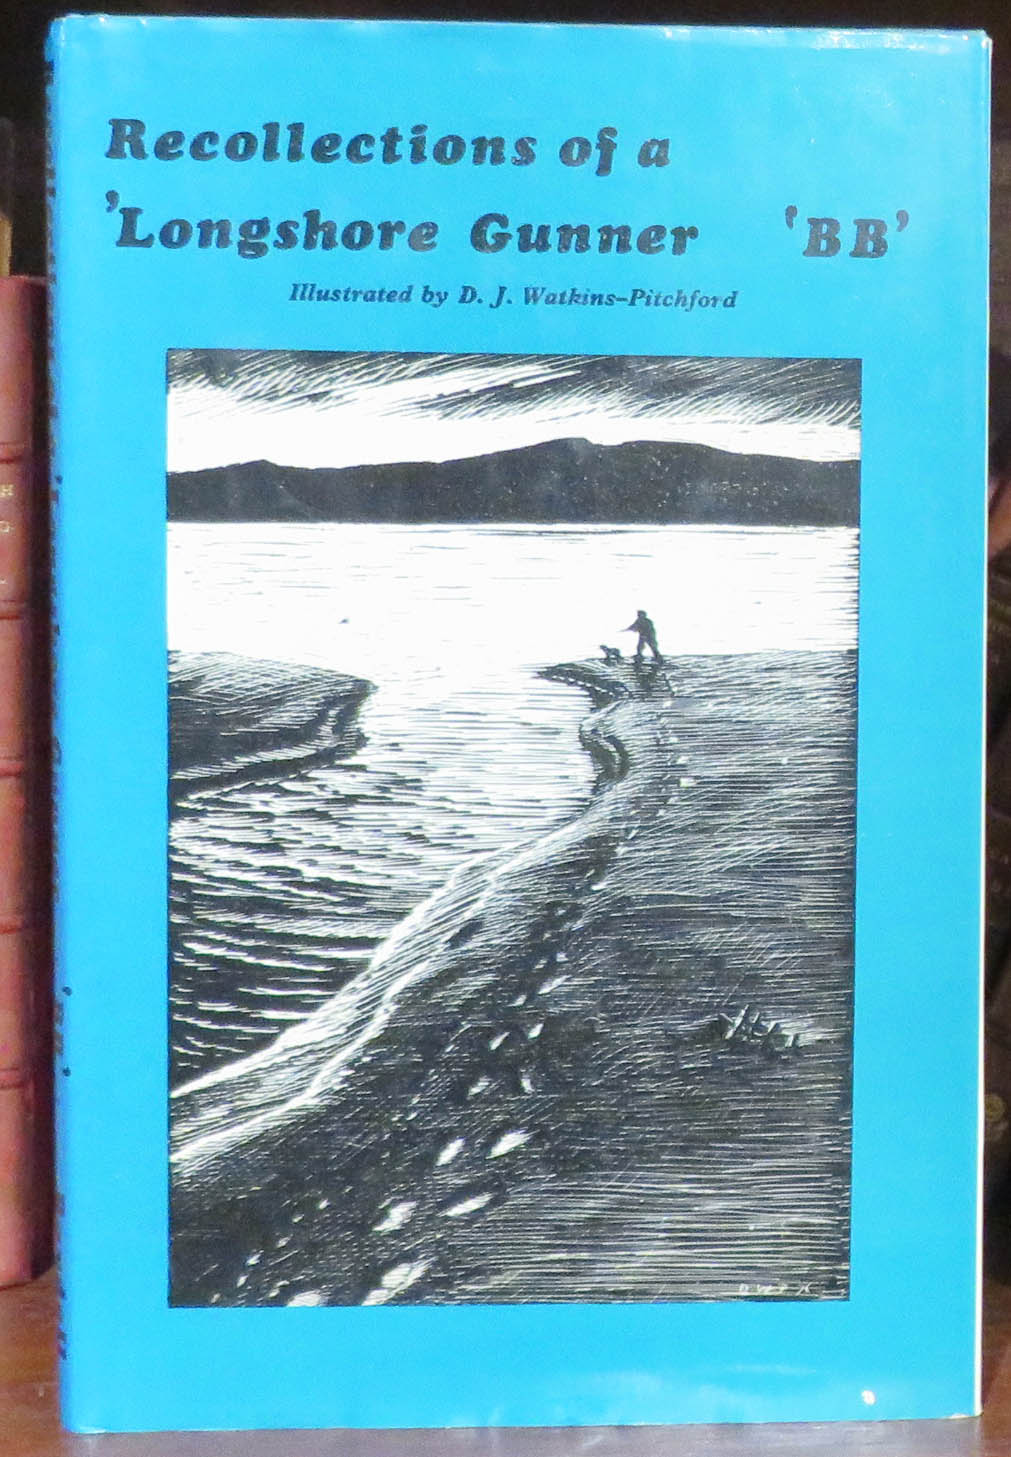 Recollections of a Longshore Gunner